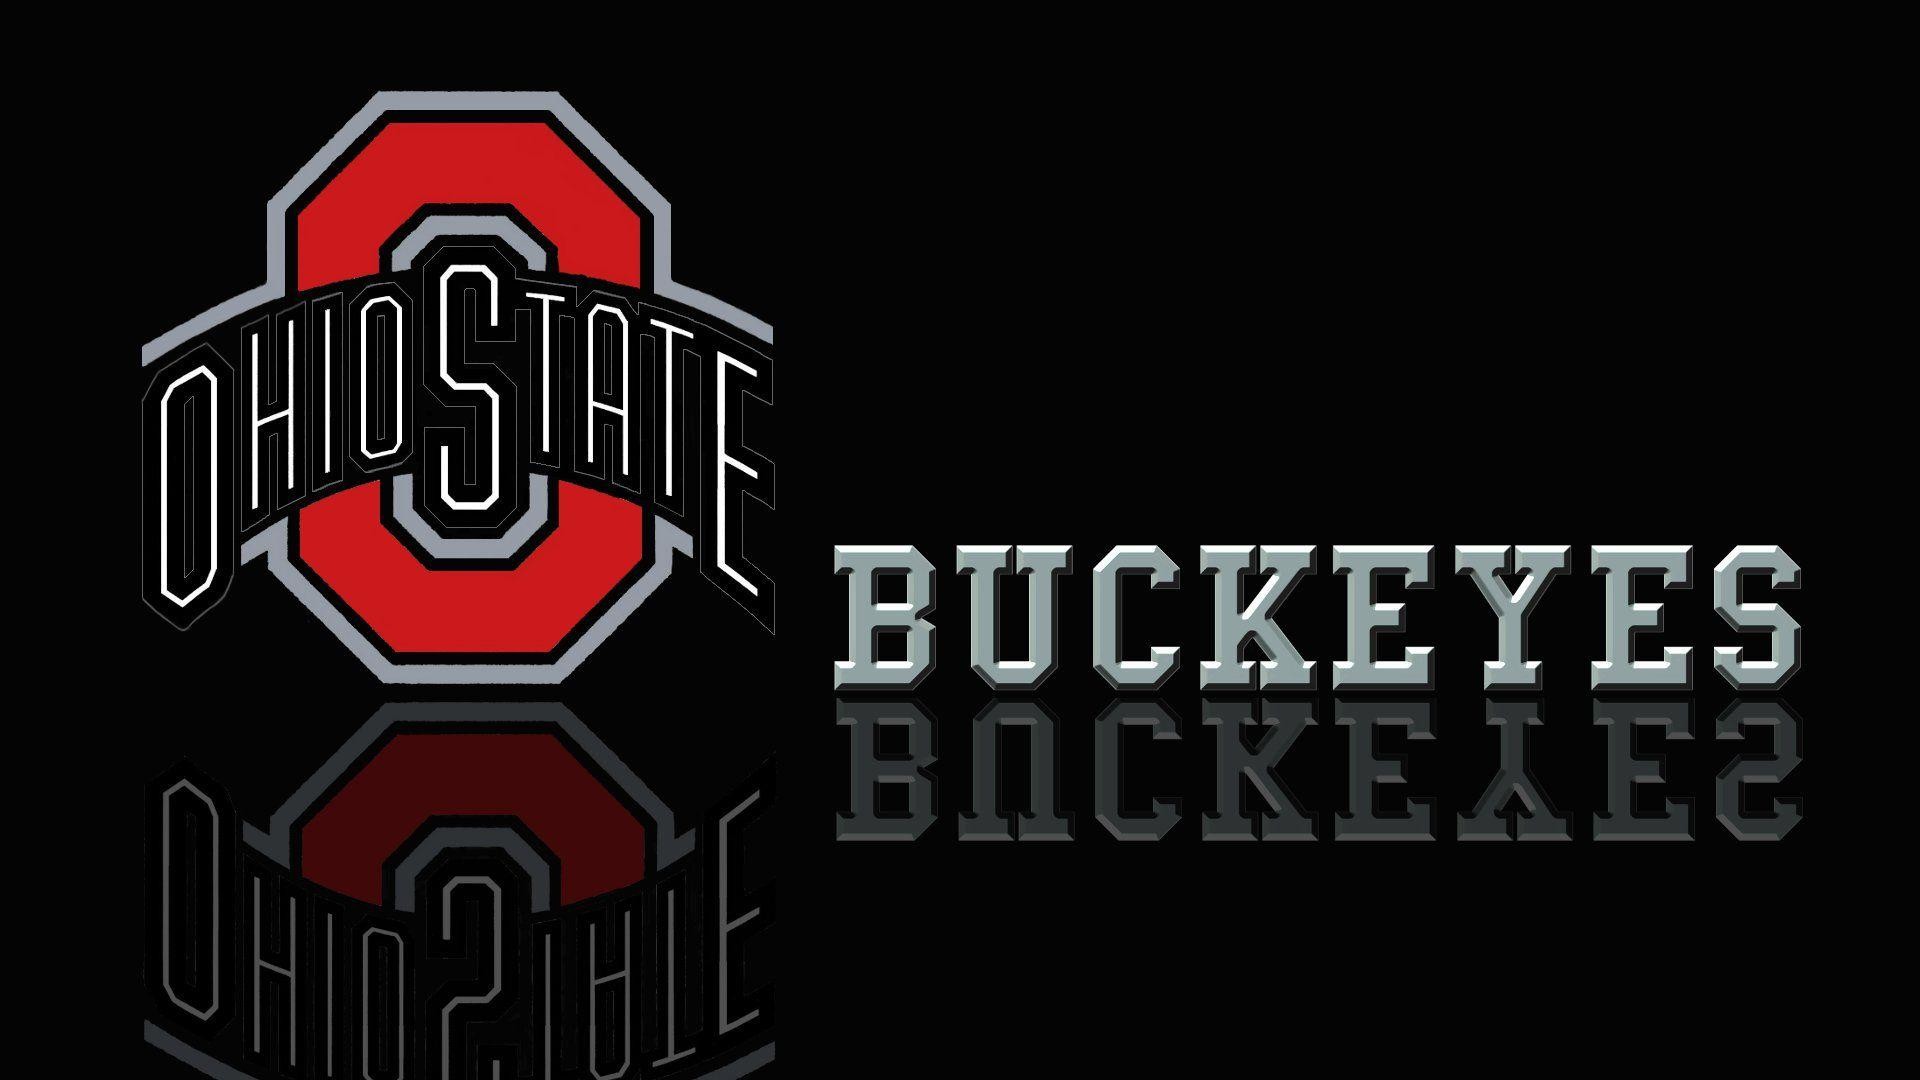 Ohio State Wallpaper (78+ pictures)